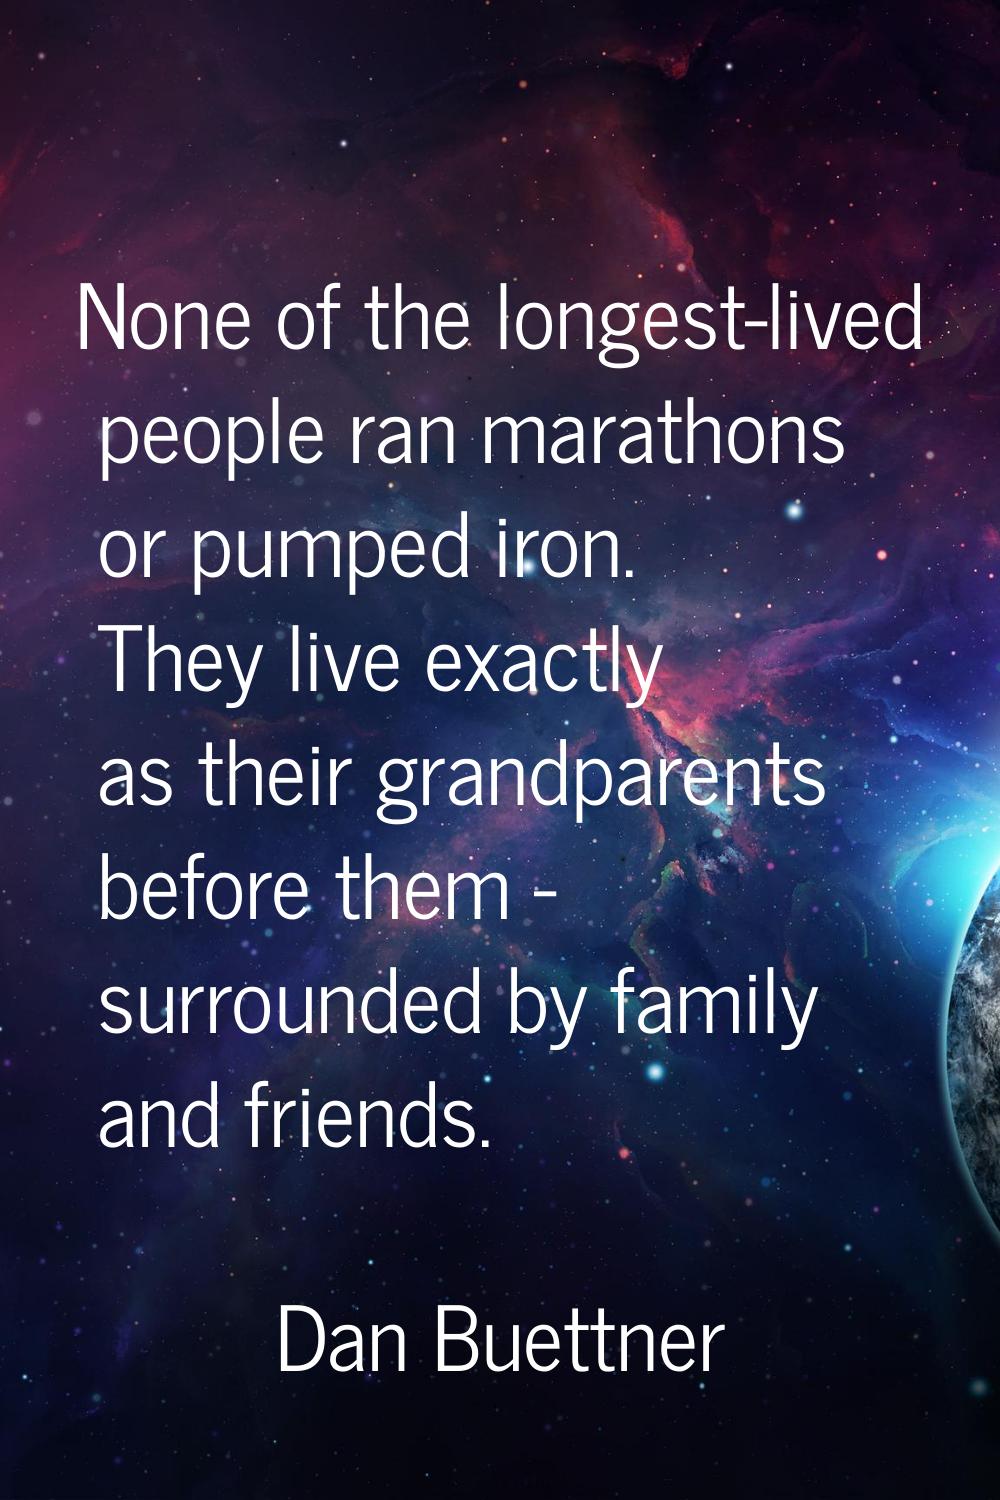 None of the longest-lived people ran marathons or pumped iron. They live exactly as their grandpare